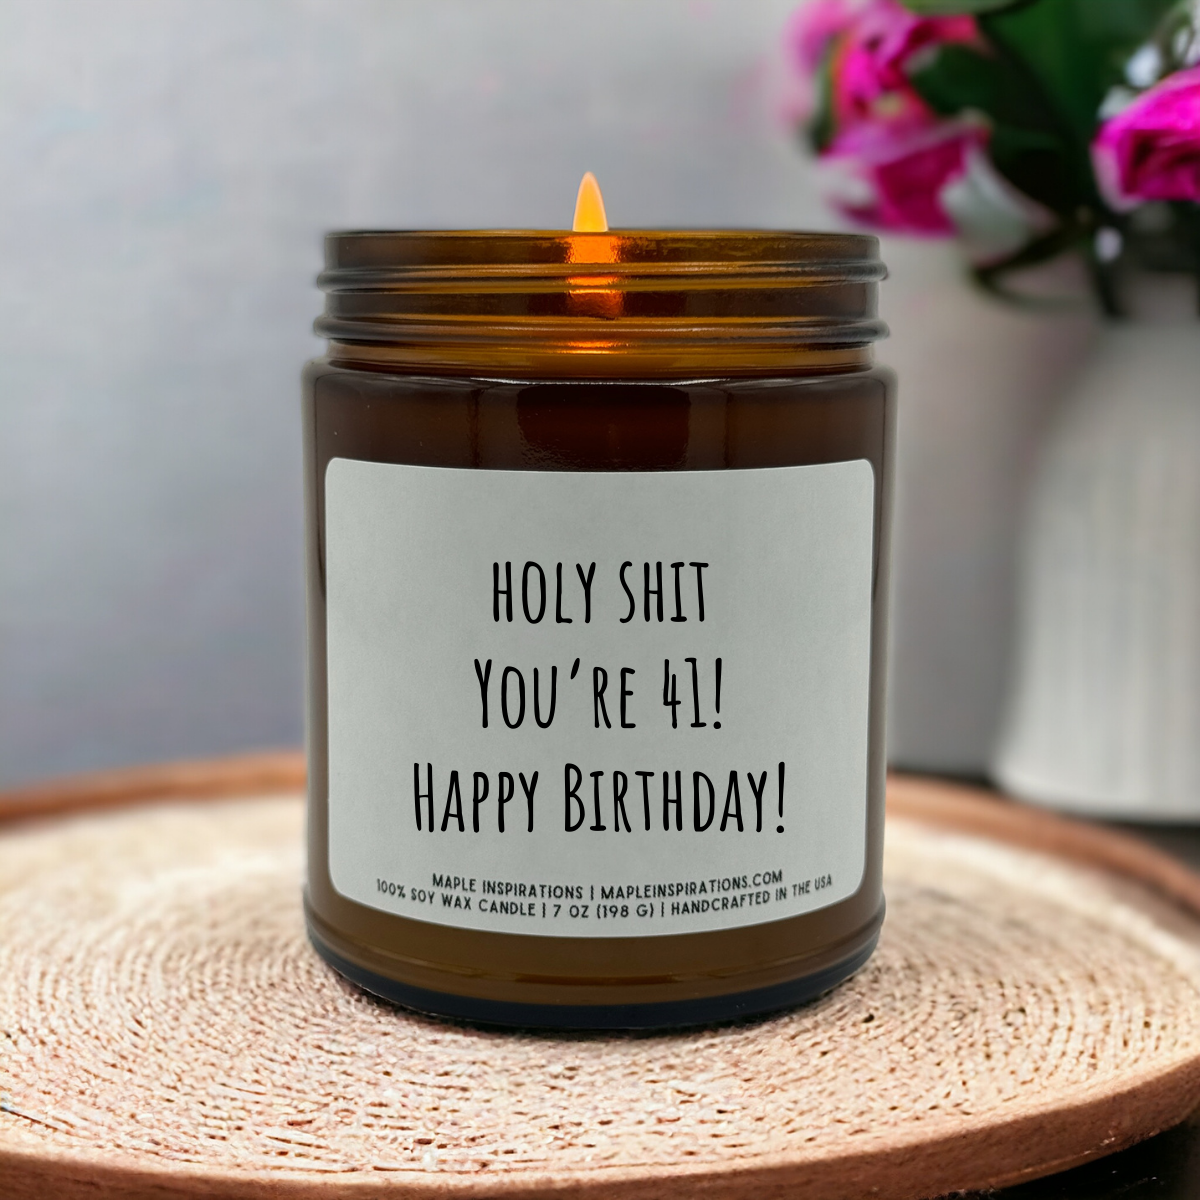 41th Birthday Candle, Funny 41th Birthday Gift, Funny Candle, Candle Gift, Gift For 41th Birthday Turning 41 Years Old, Holy Shit You're 41